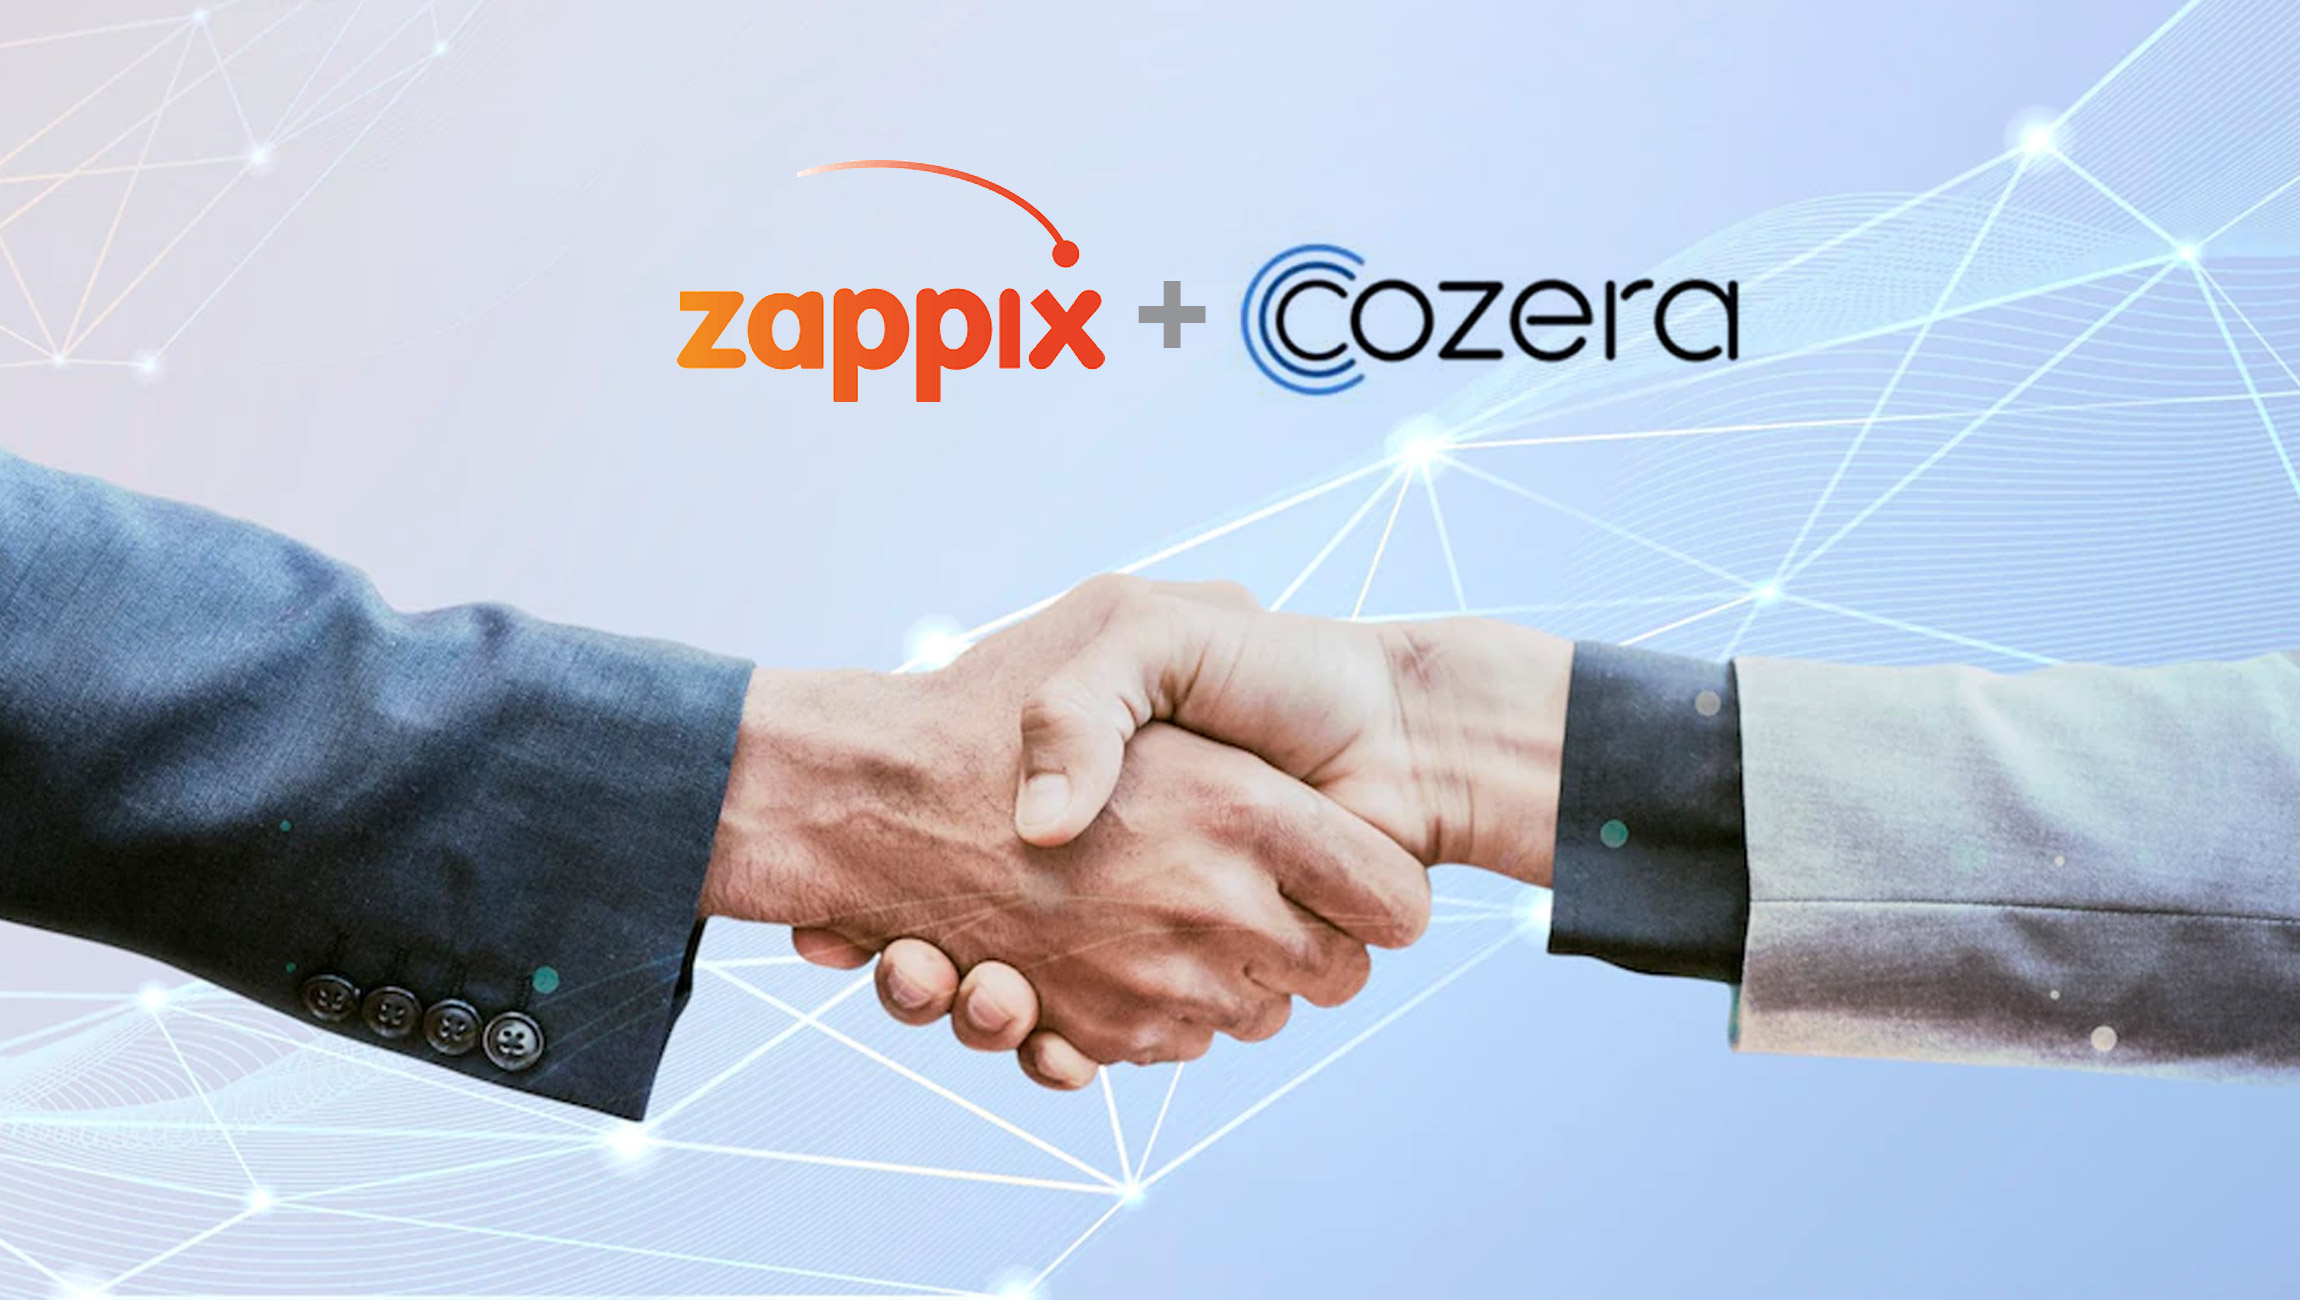 Zappix Announces Partnership with Cozera - Integrating Self-Service with Secure Identity Authentication-as-a-Service